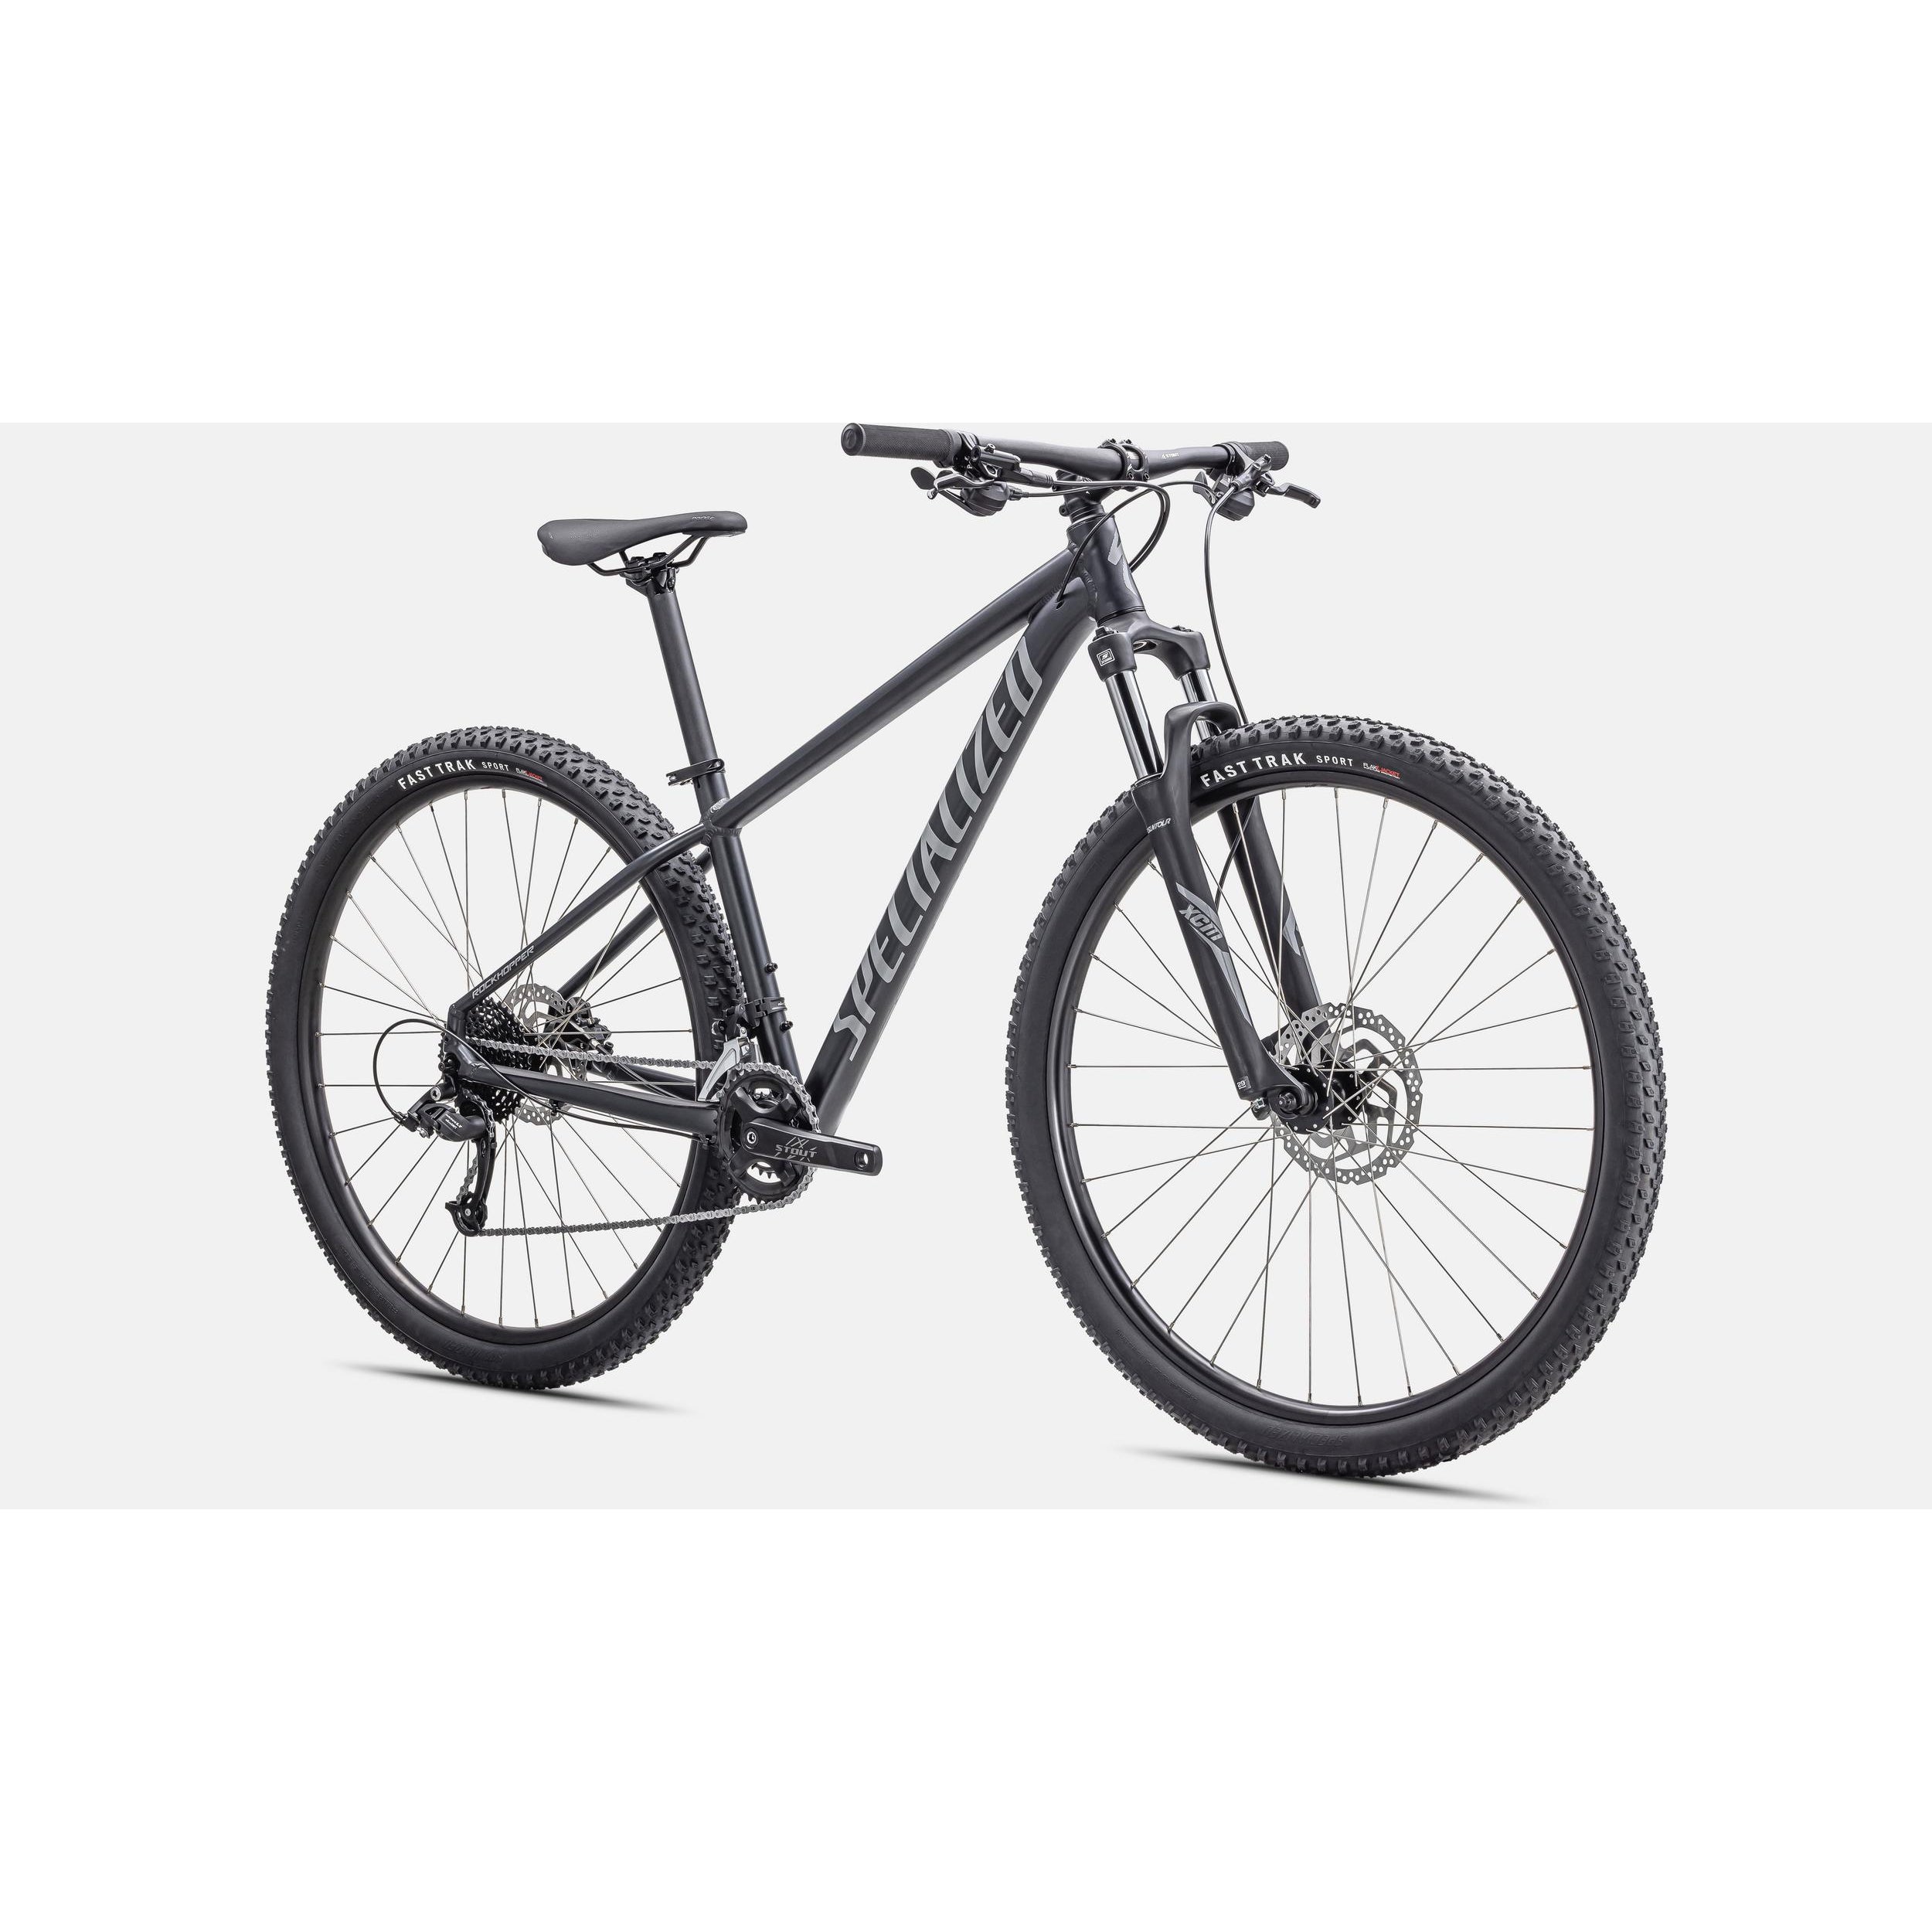 SPECIALIZED ROCKHOPPER SPORT 29 スペシャライズド ロックホッパー ...